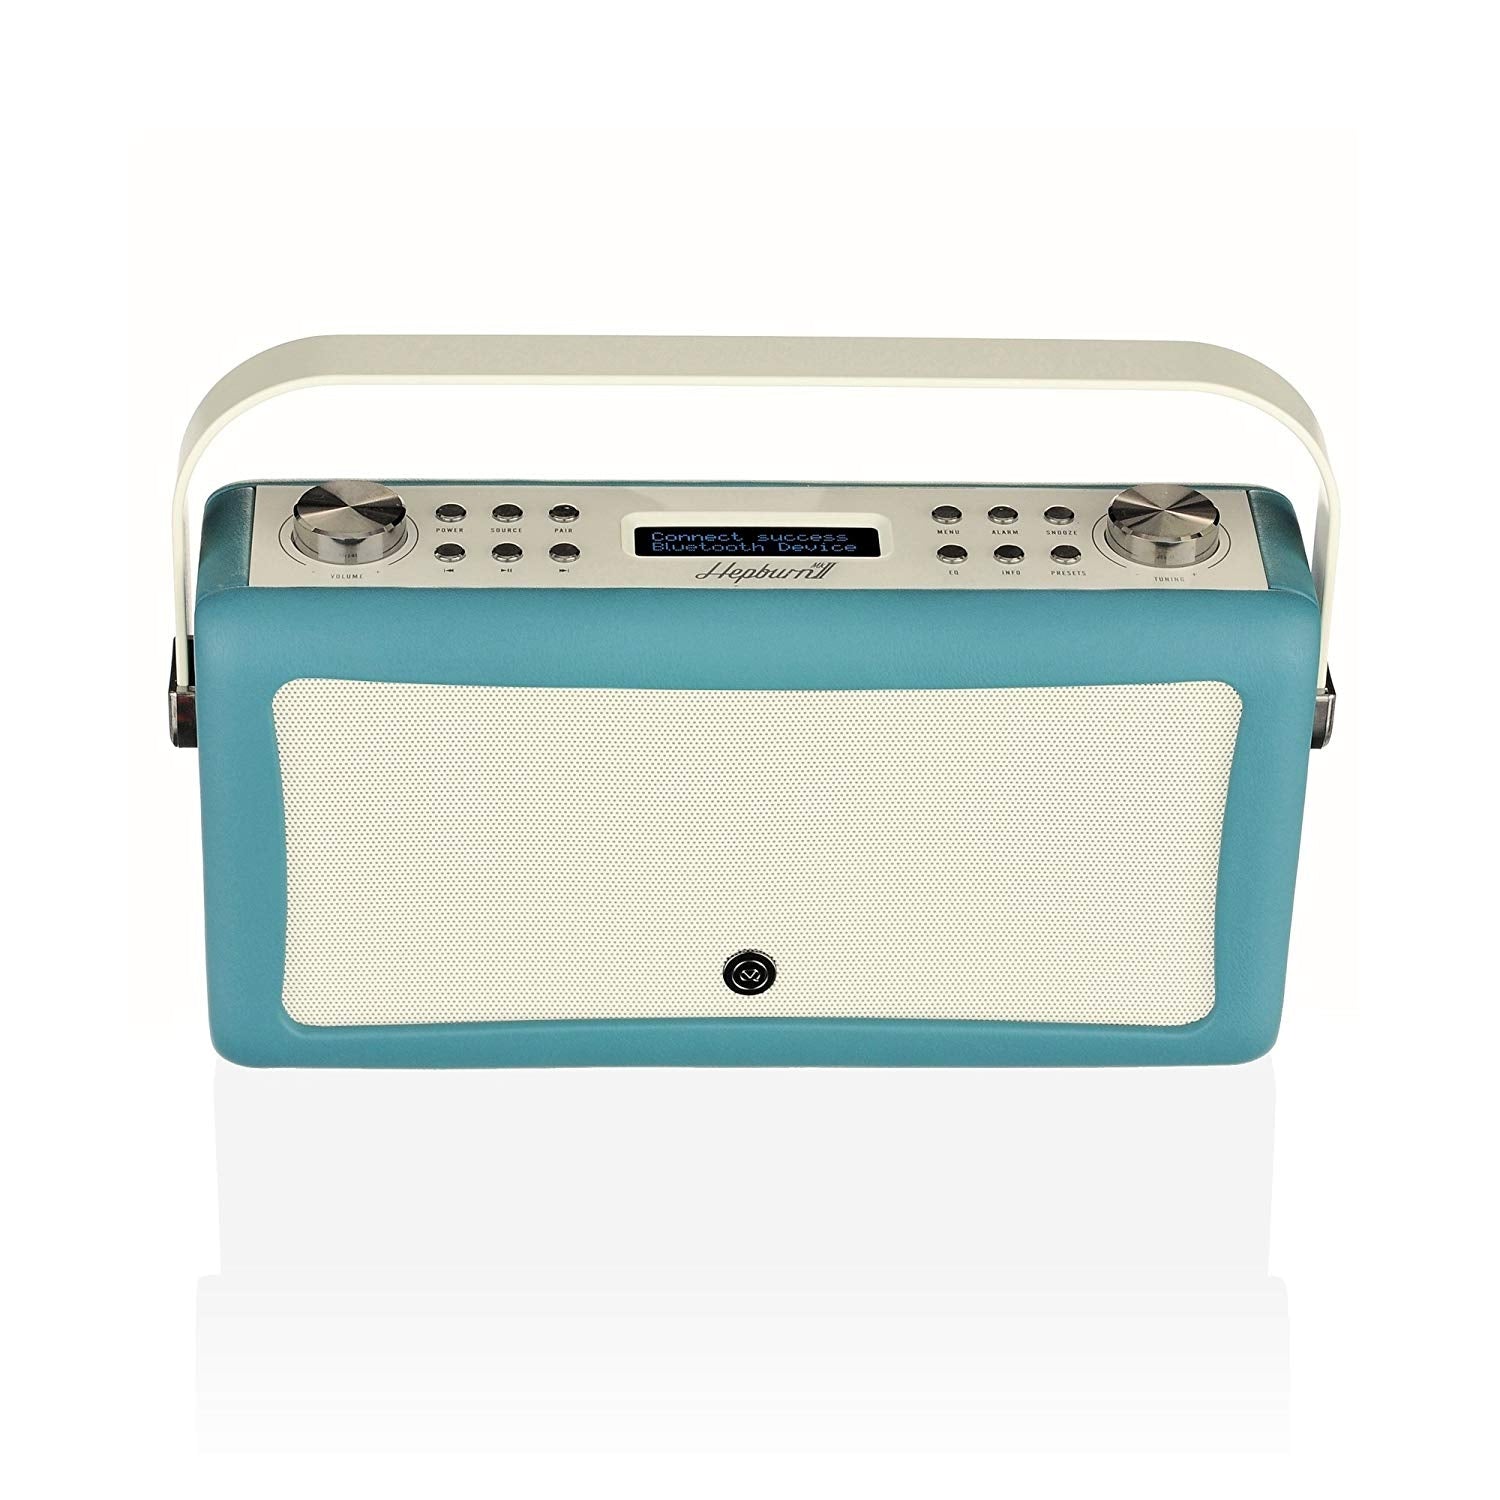 VQ Hepburn Mk II Portable DAB+/FM Radio & Bluetooth Speaker with Rechargeable Battery Pack in Teal - 5